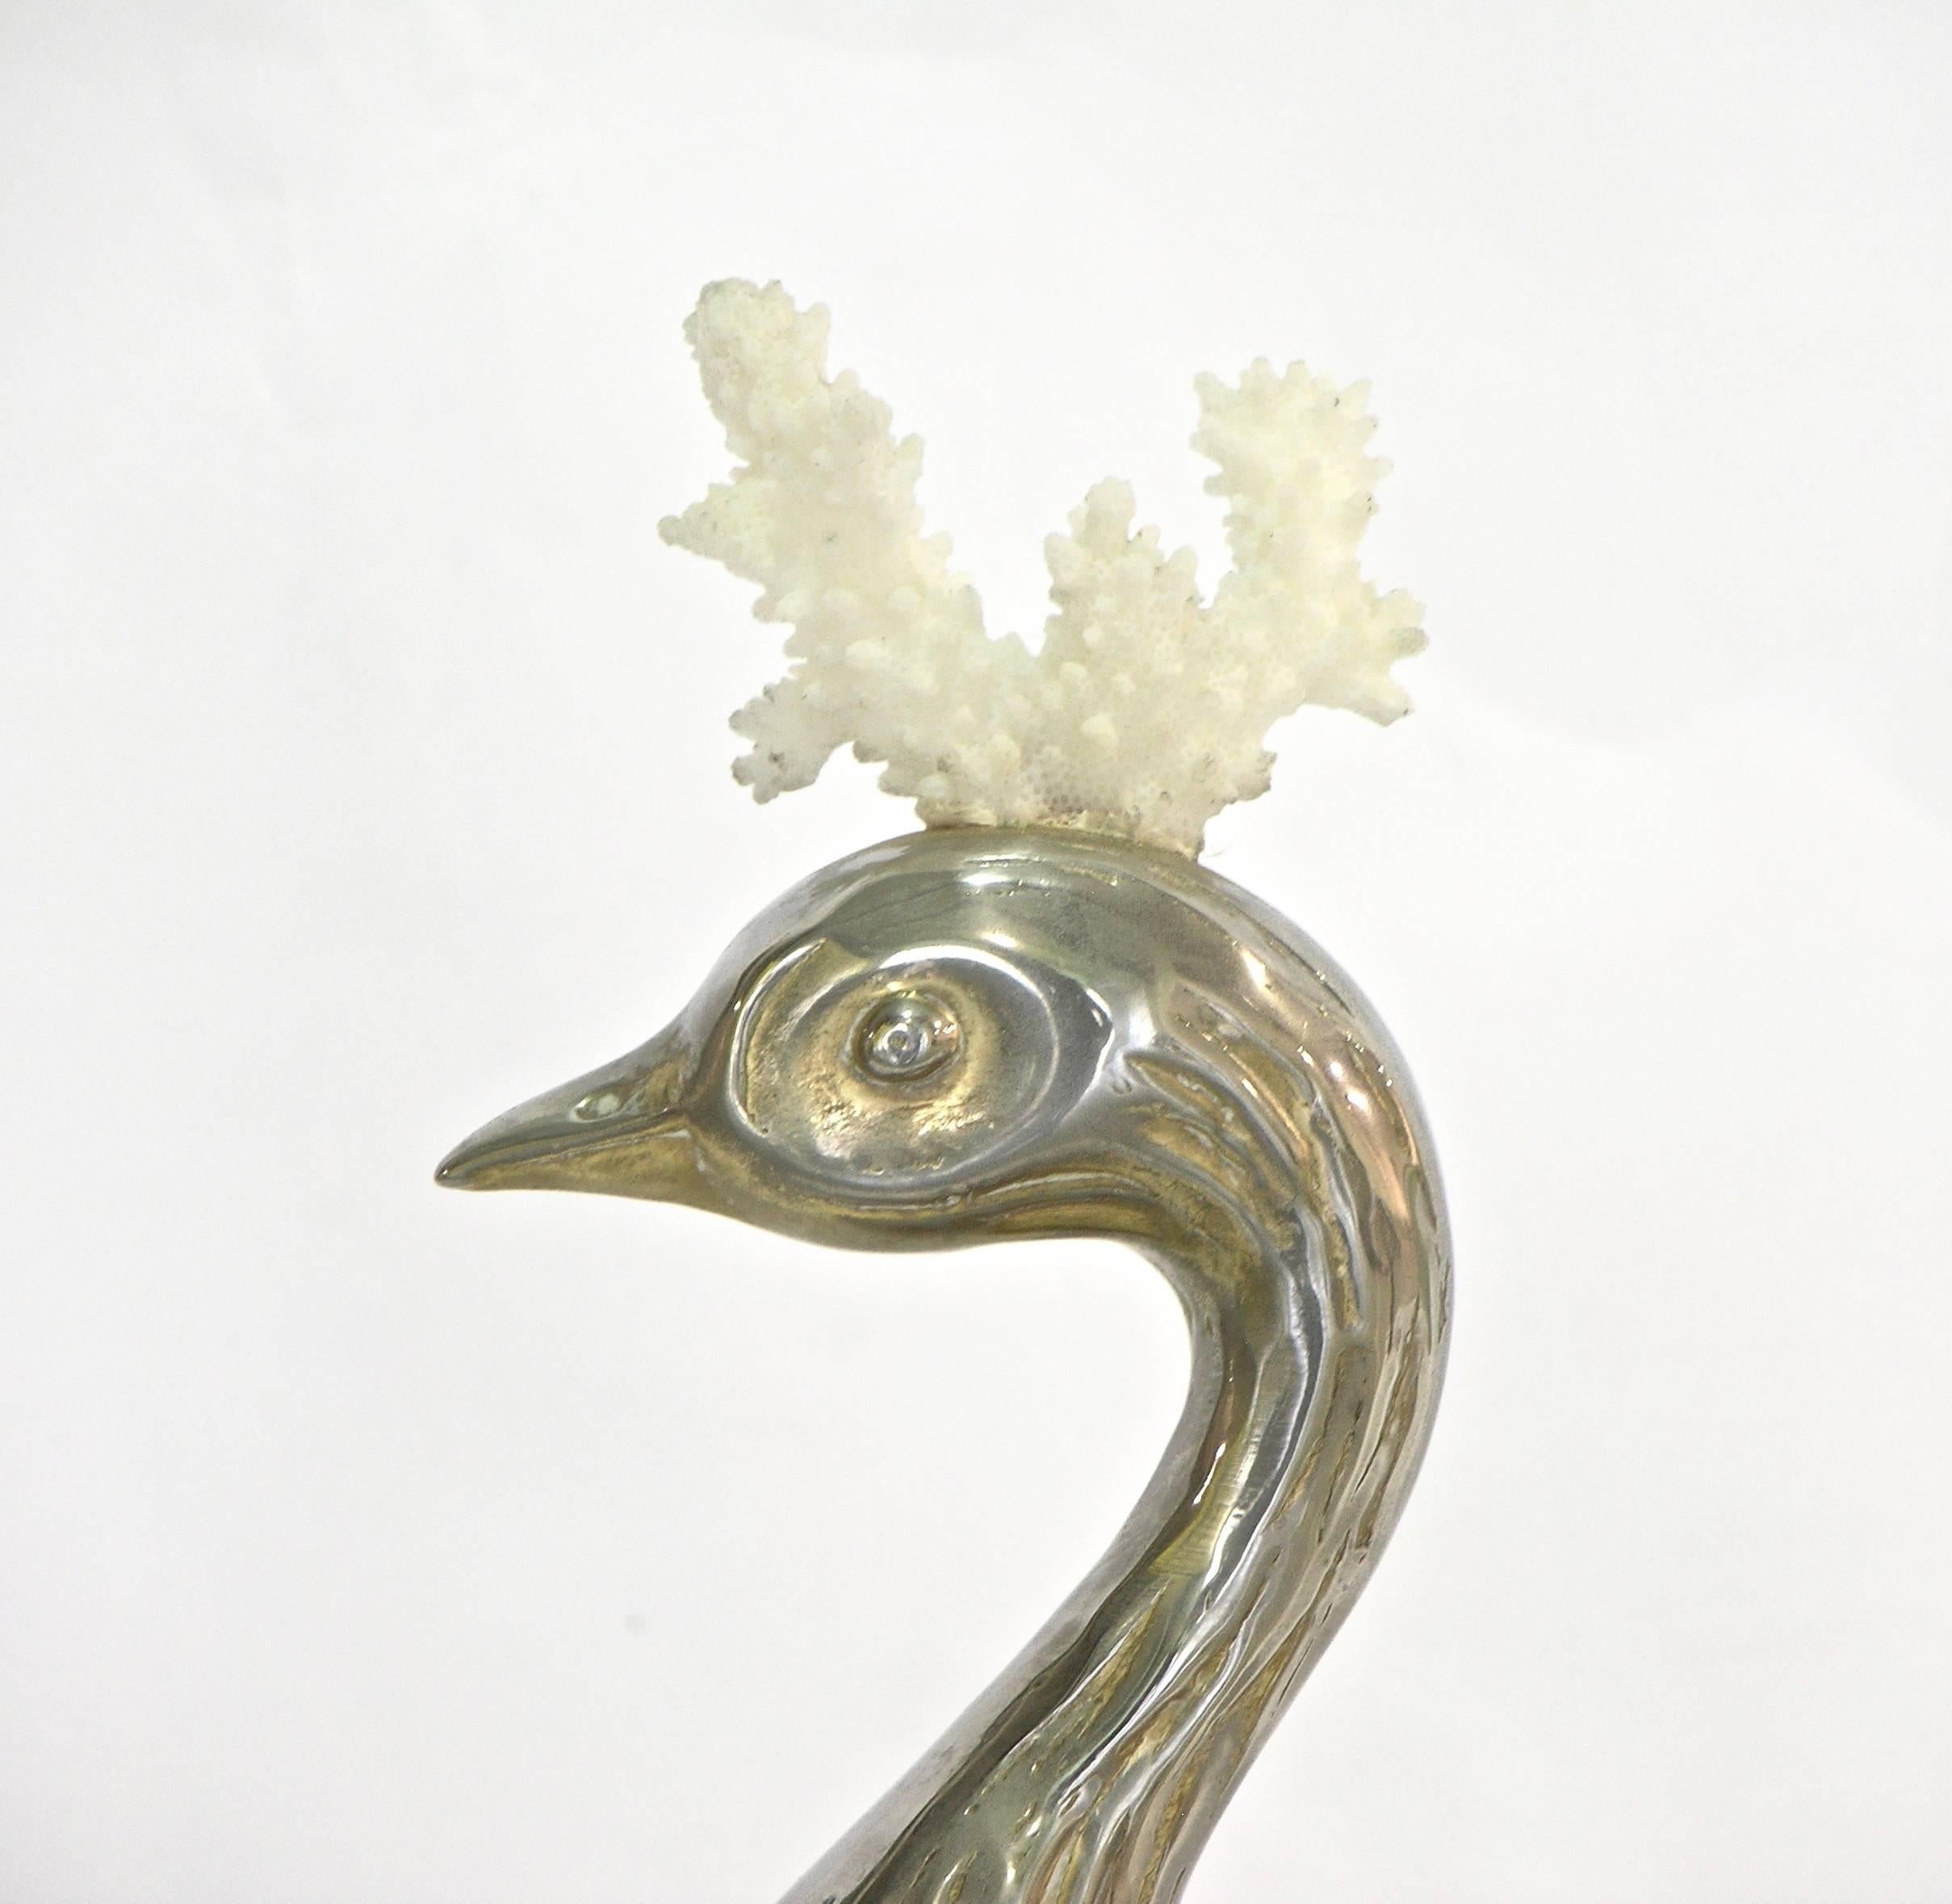 Antonio Pavia 1970s Italian Silver Plated Cream Bird Sculpture with White Crest In Excellent Condition For Sale In New York, NY